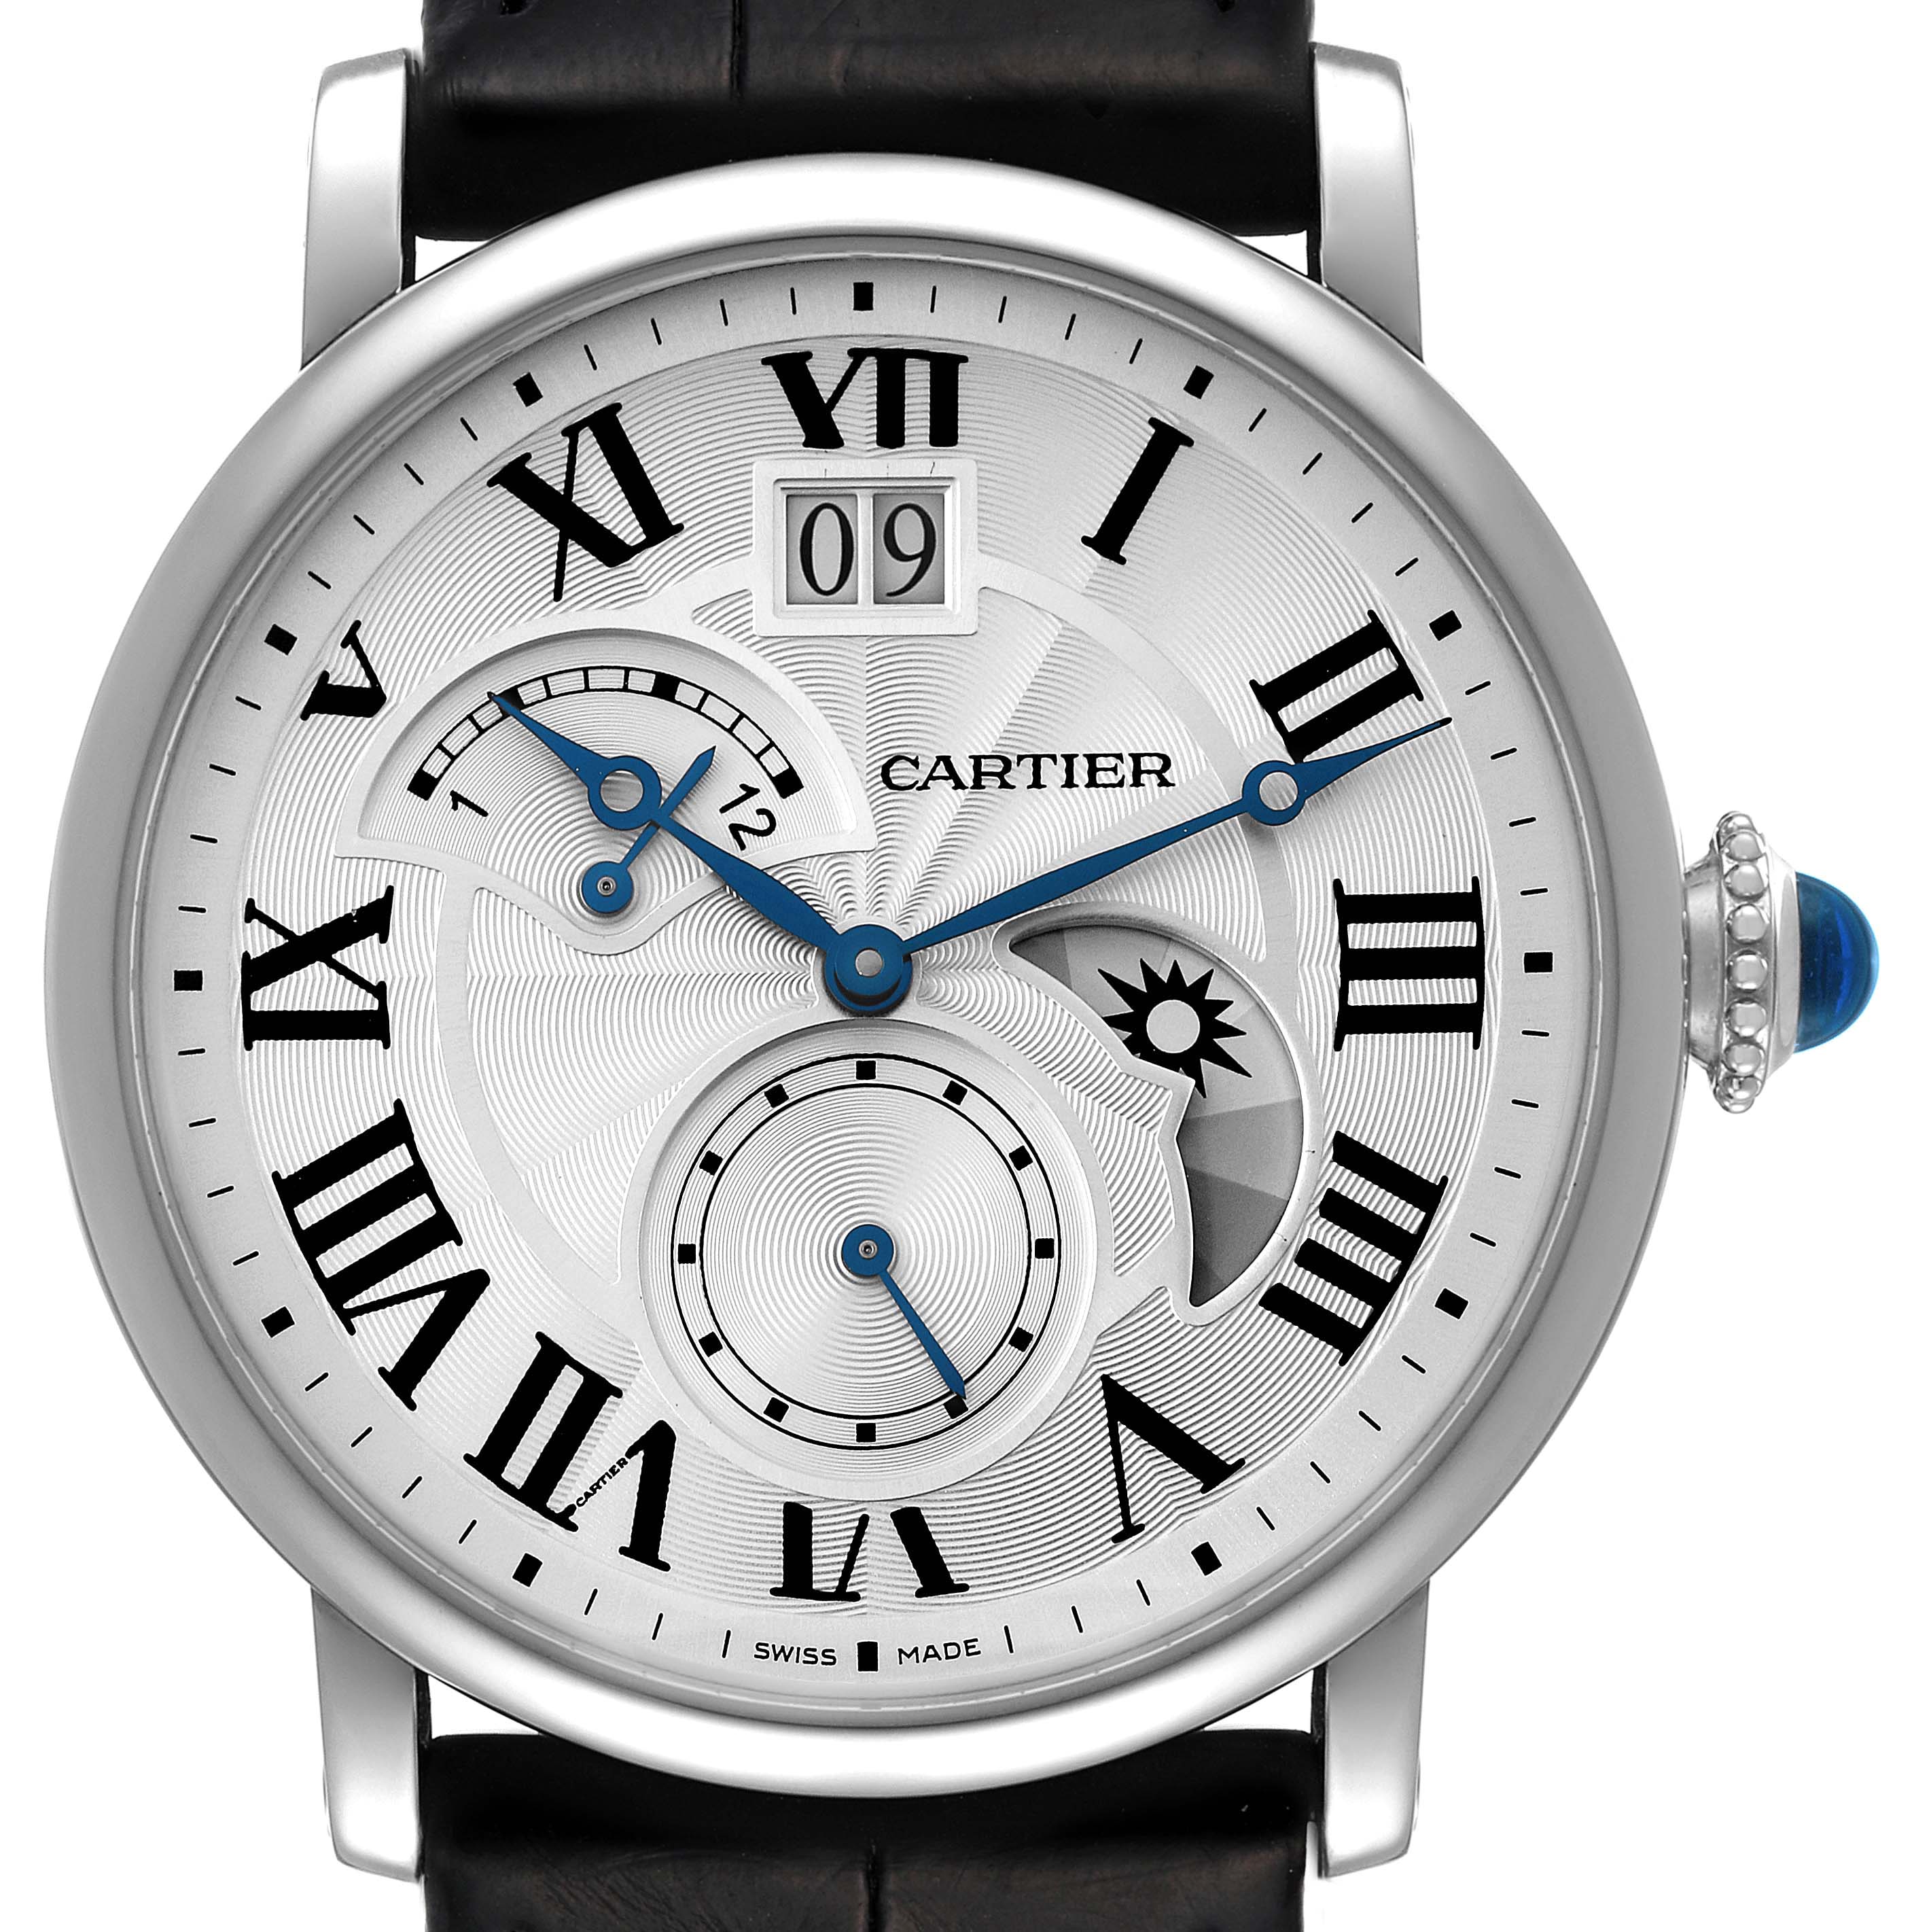 Cartier takes the stage of Saturday Night Live